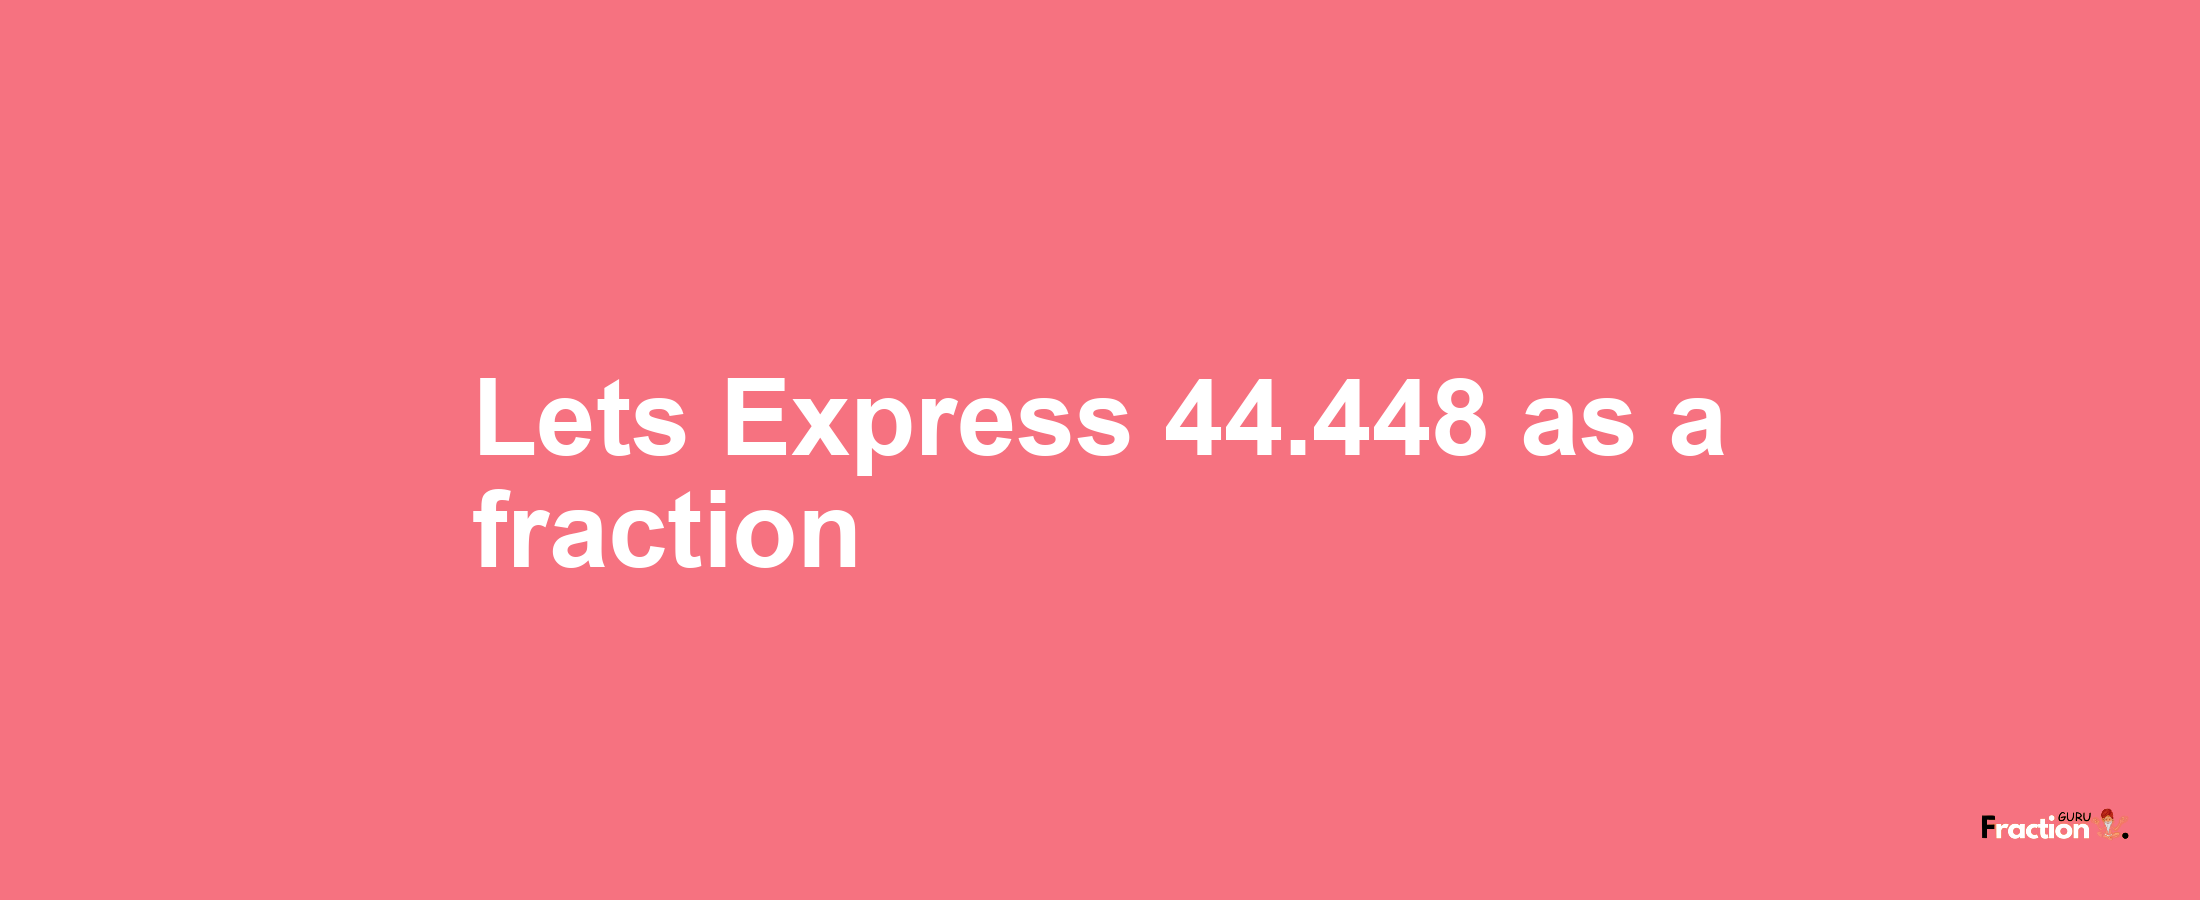 Lets Express 44.448 as afraction